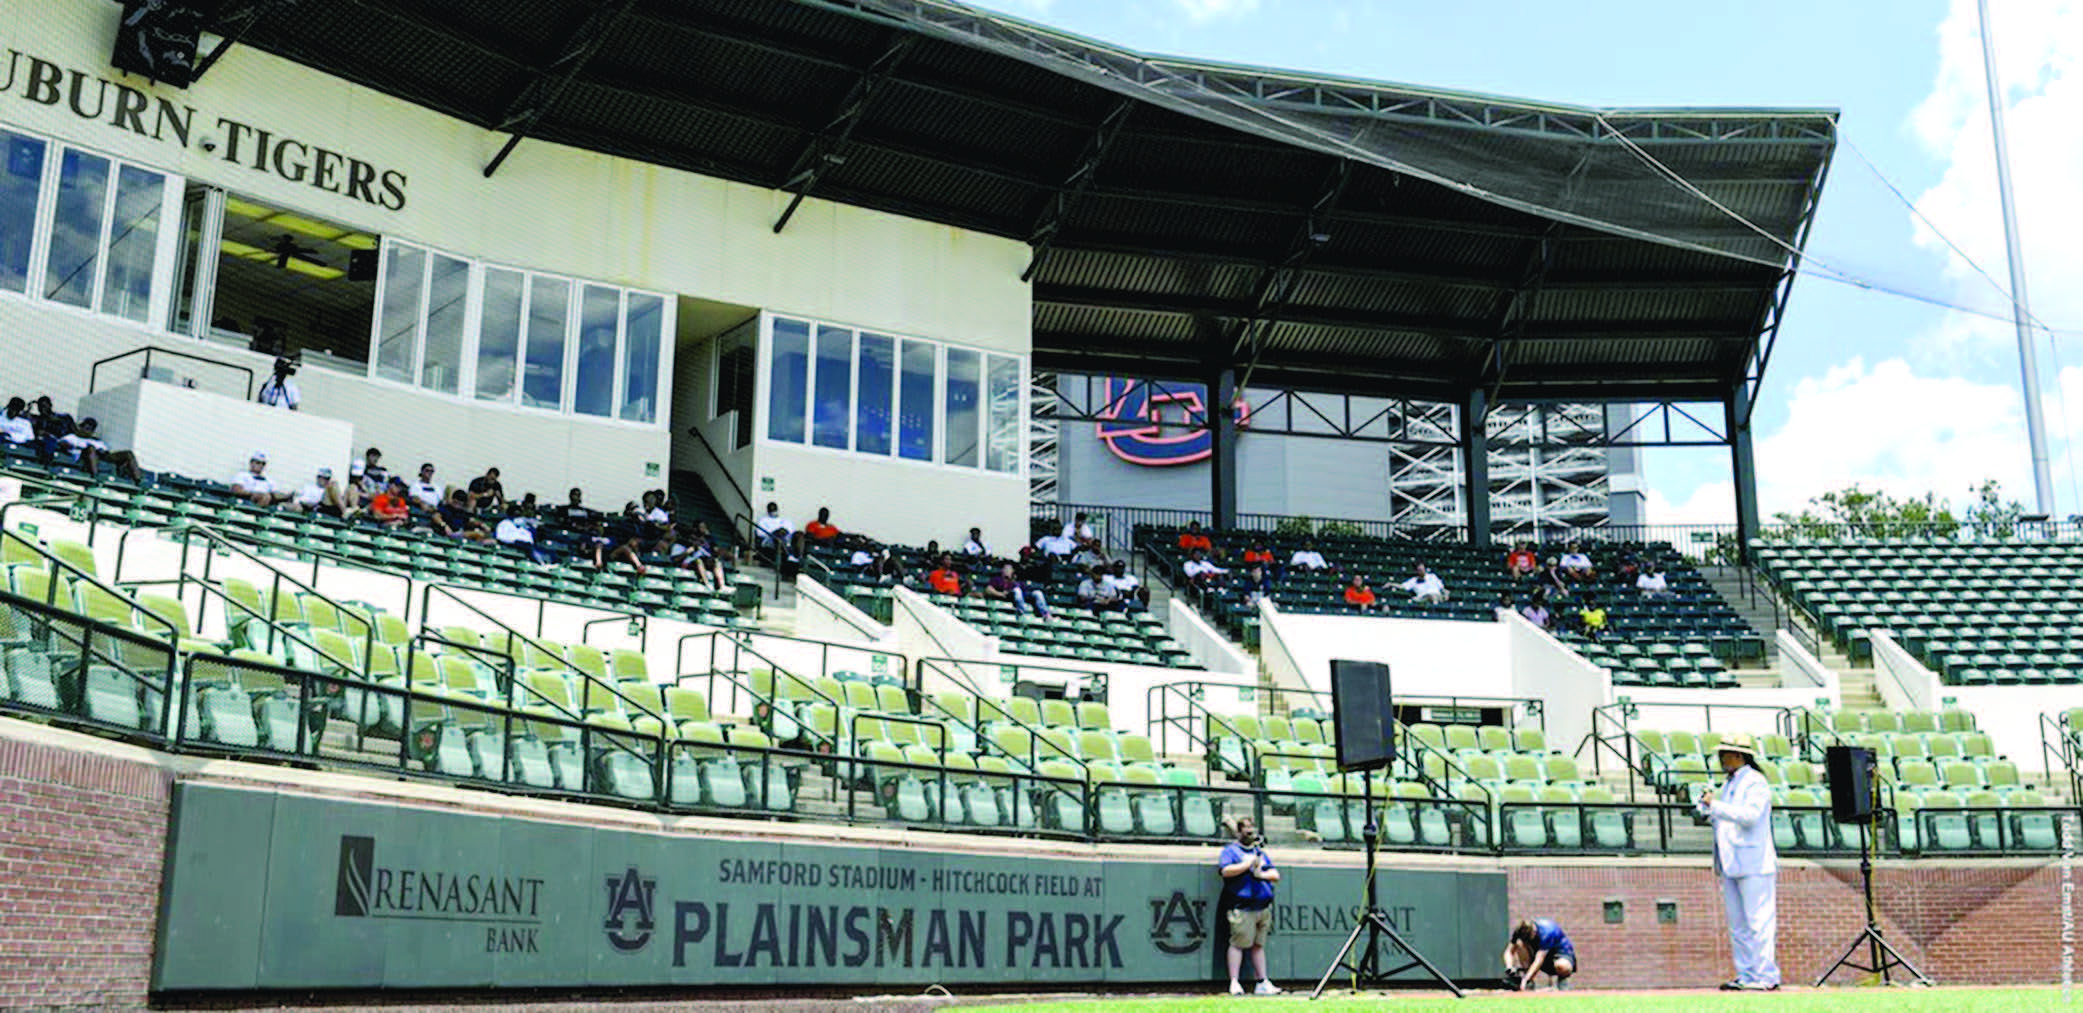 View of stands in baseball stadium